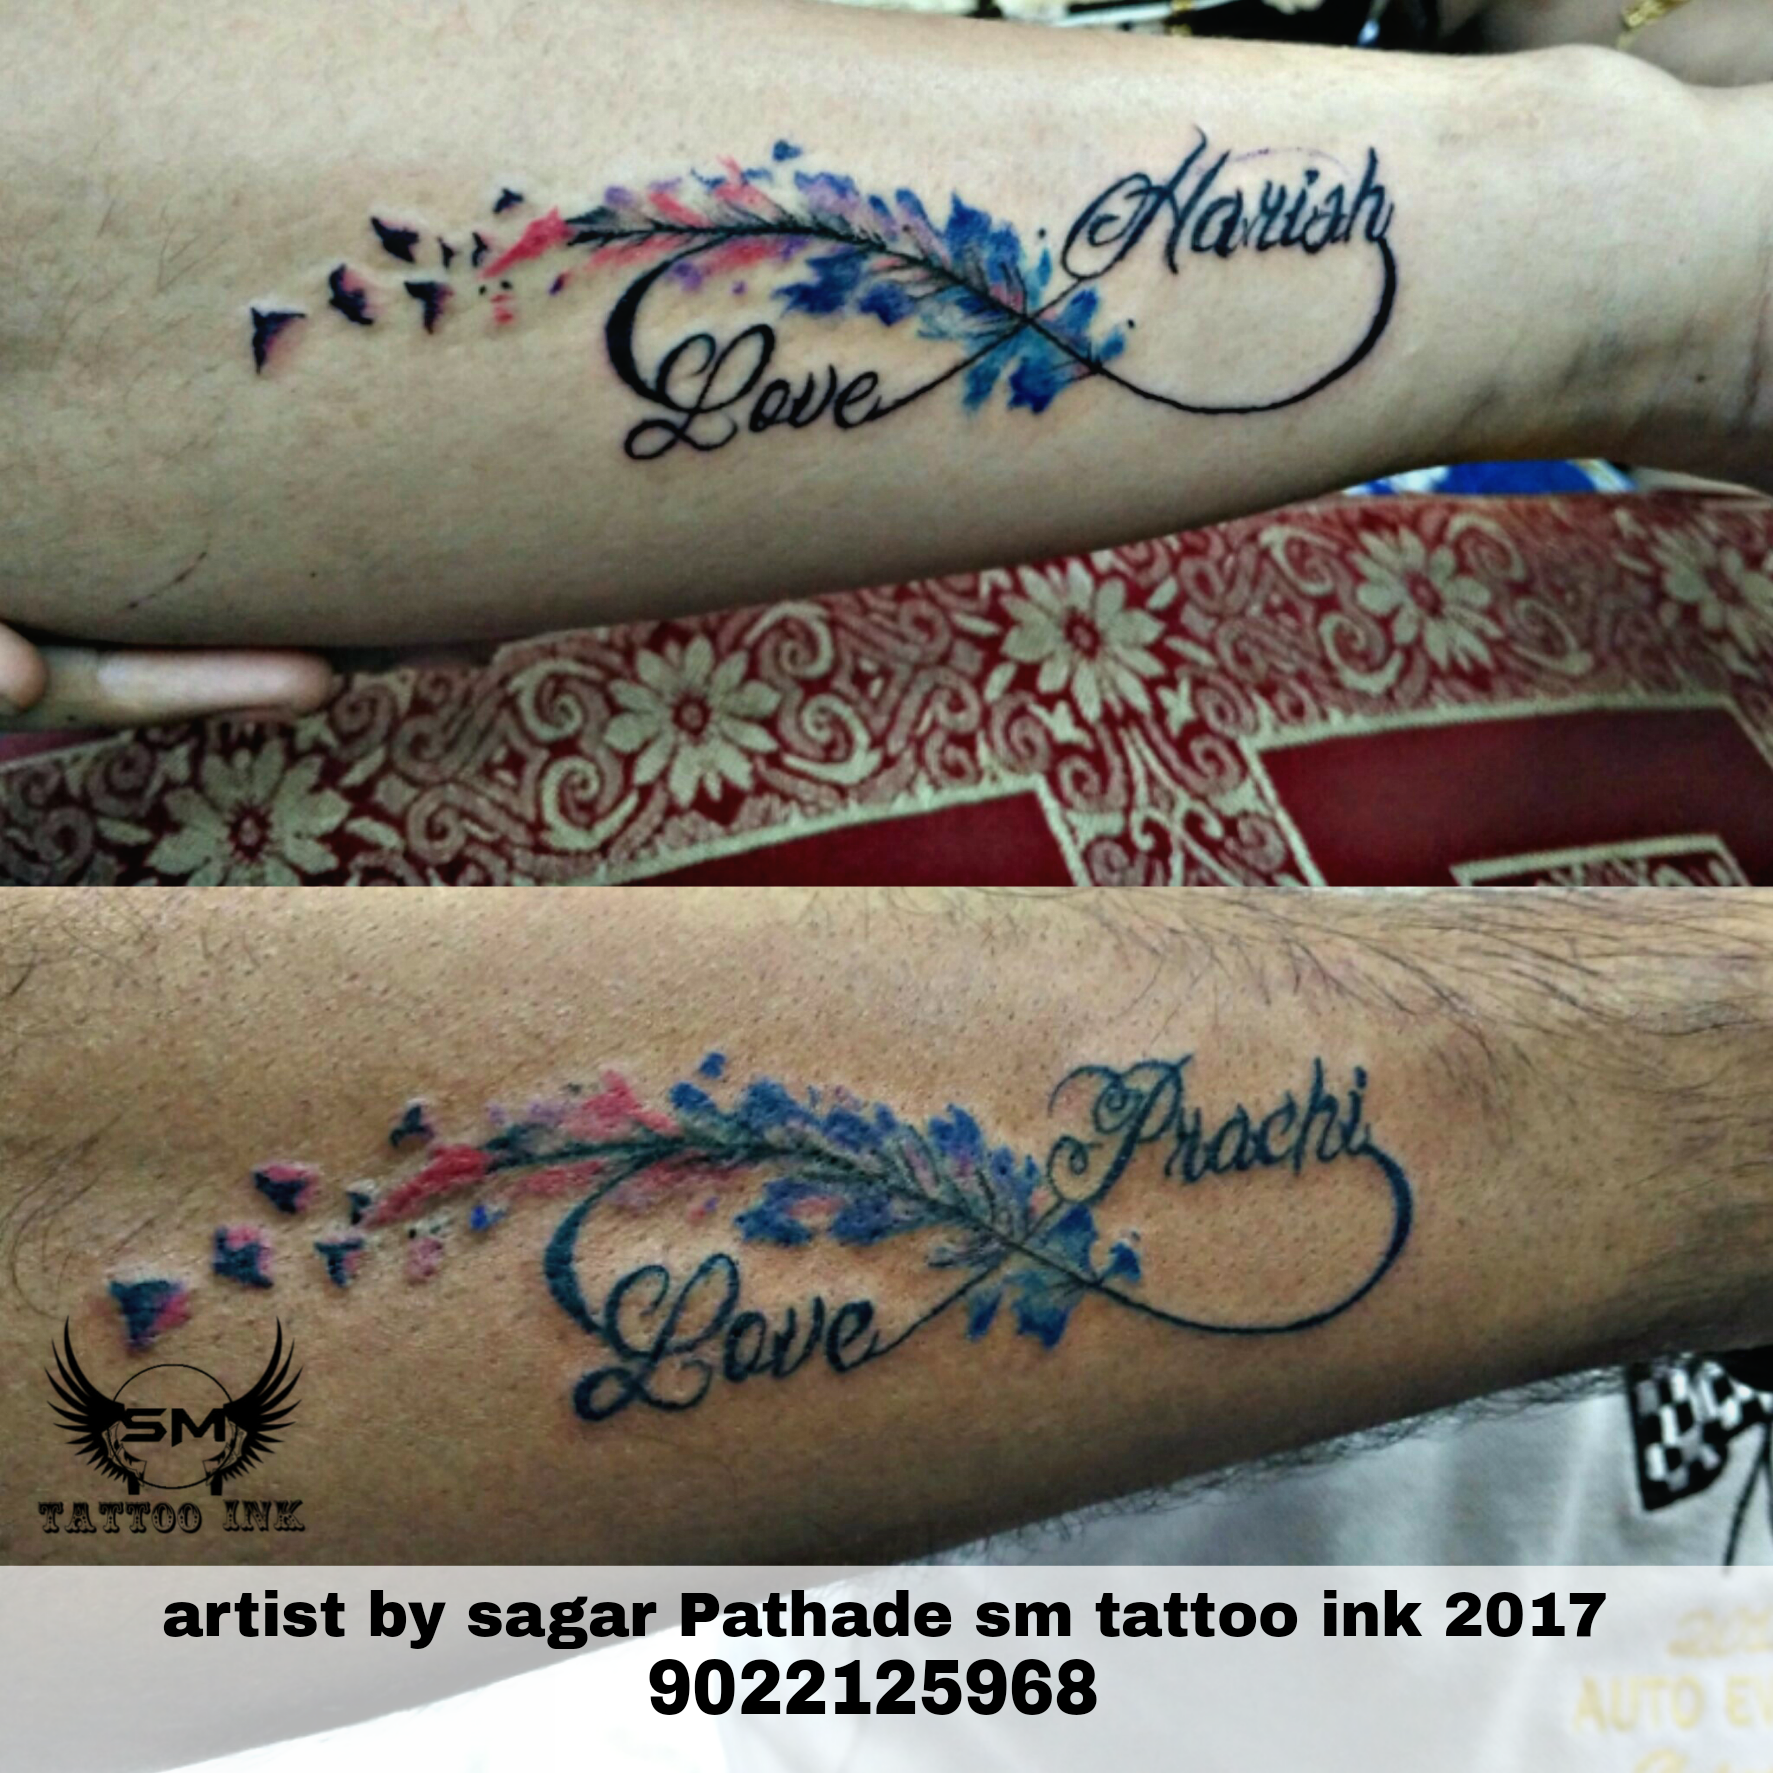 24 Hrs Open Unisex Name Tattoos Designs